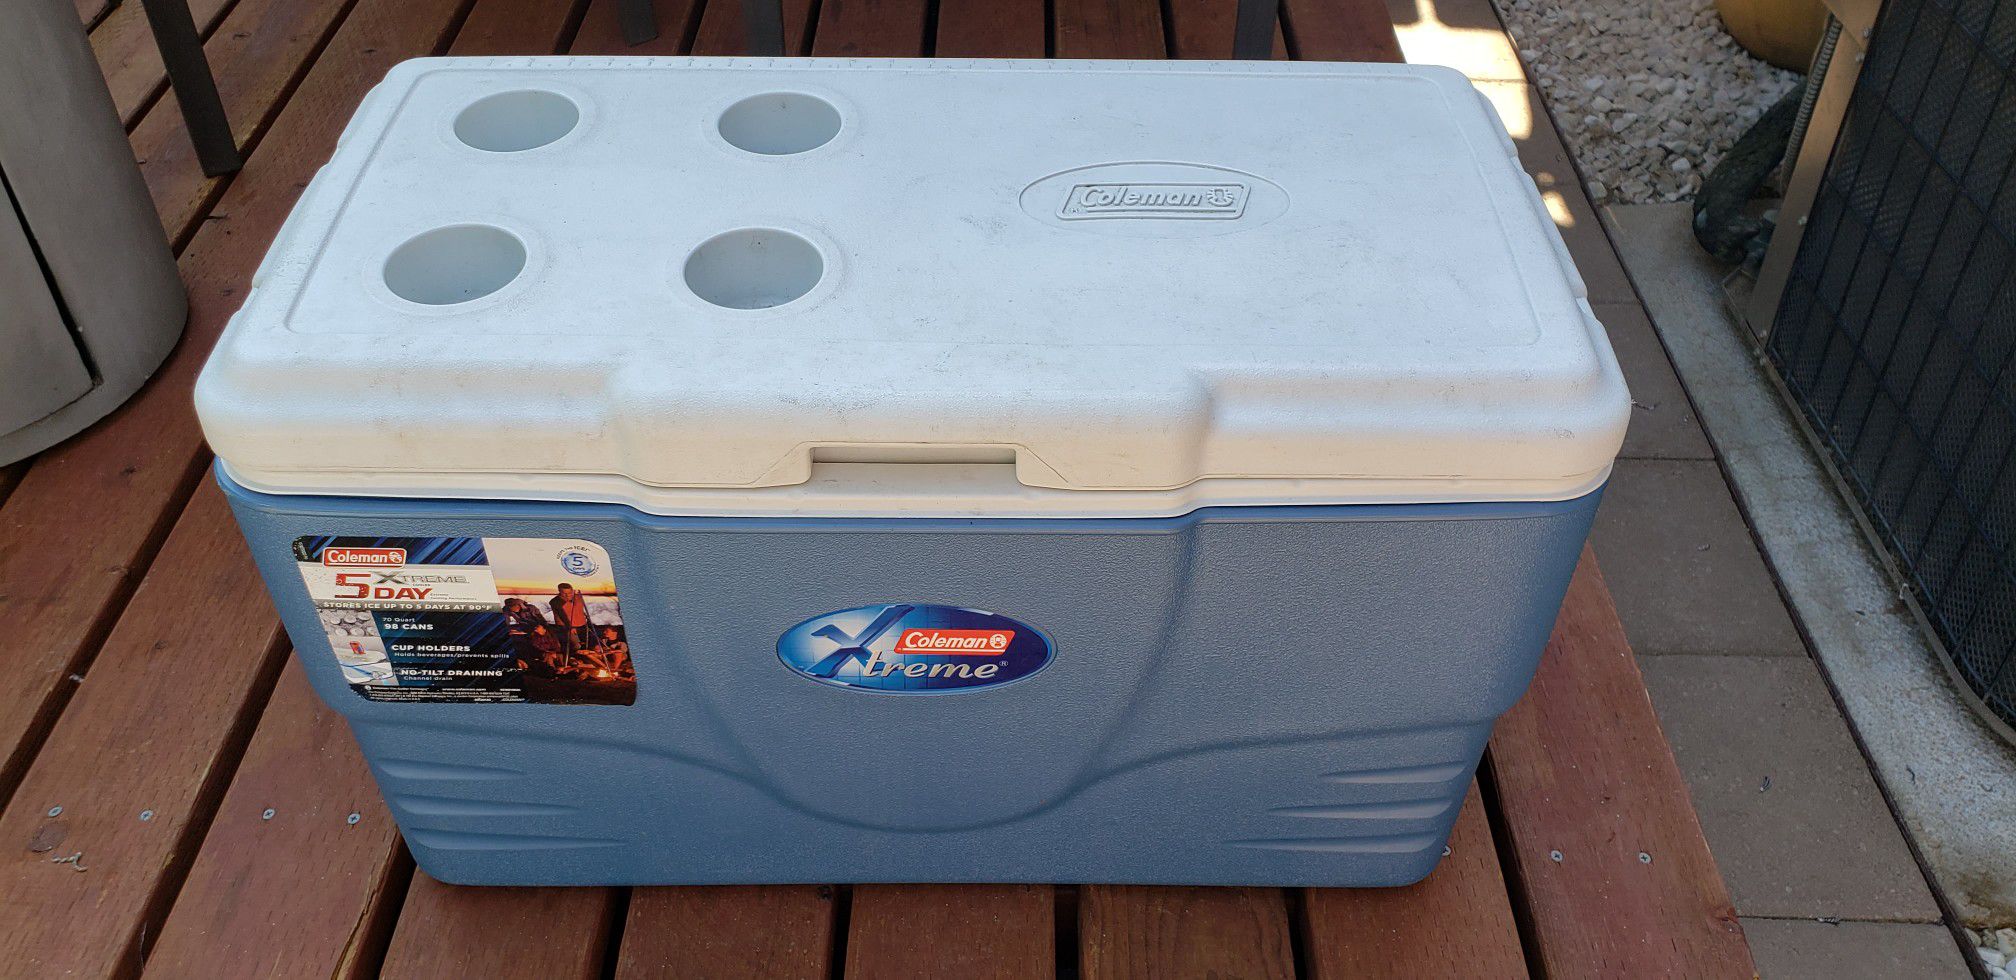 Cooler Coleman Xtreme 5 day Cooler